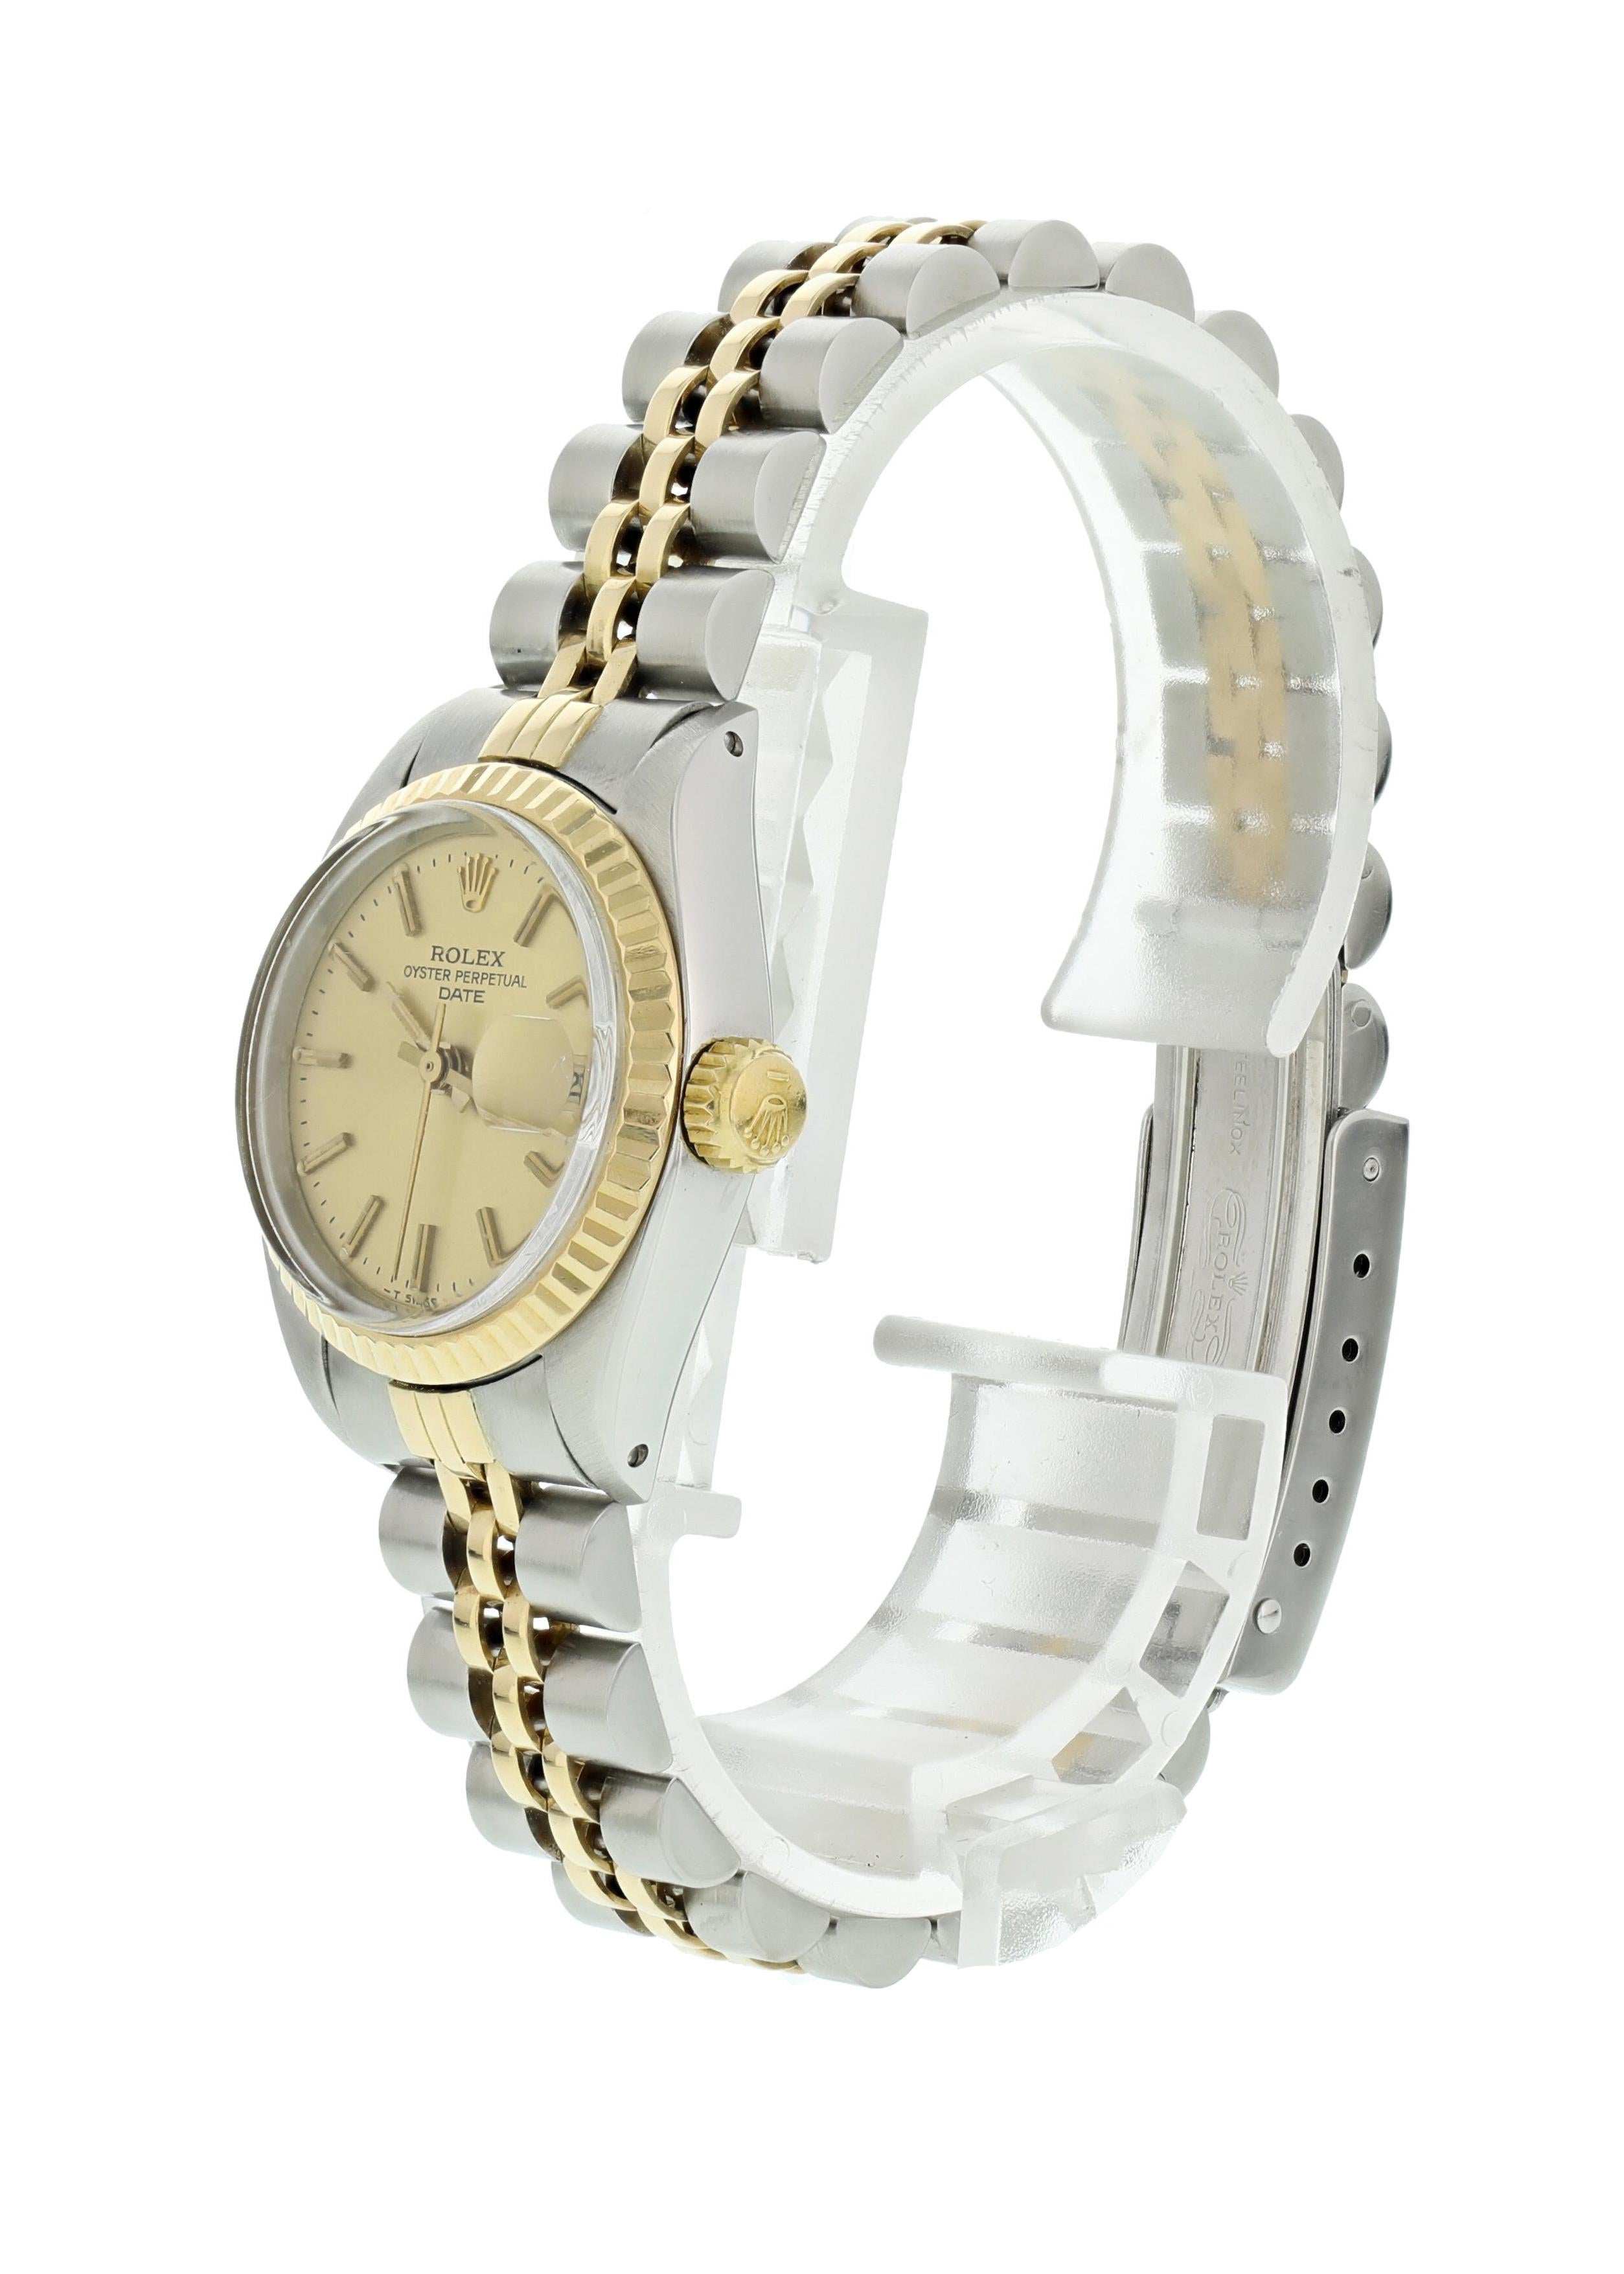 Rolex Oyster Perpetual Date 6917 Ladies Watch. 26mm stainless steel case with an 18k yellow gold fluted bezel. Champagne dial with yellow gold hands and markers. 18k yellow gold and stainless steel Jubilee band with a stainless steel fold-over clasp